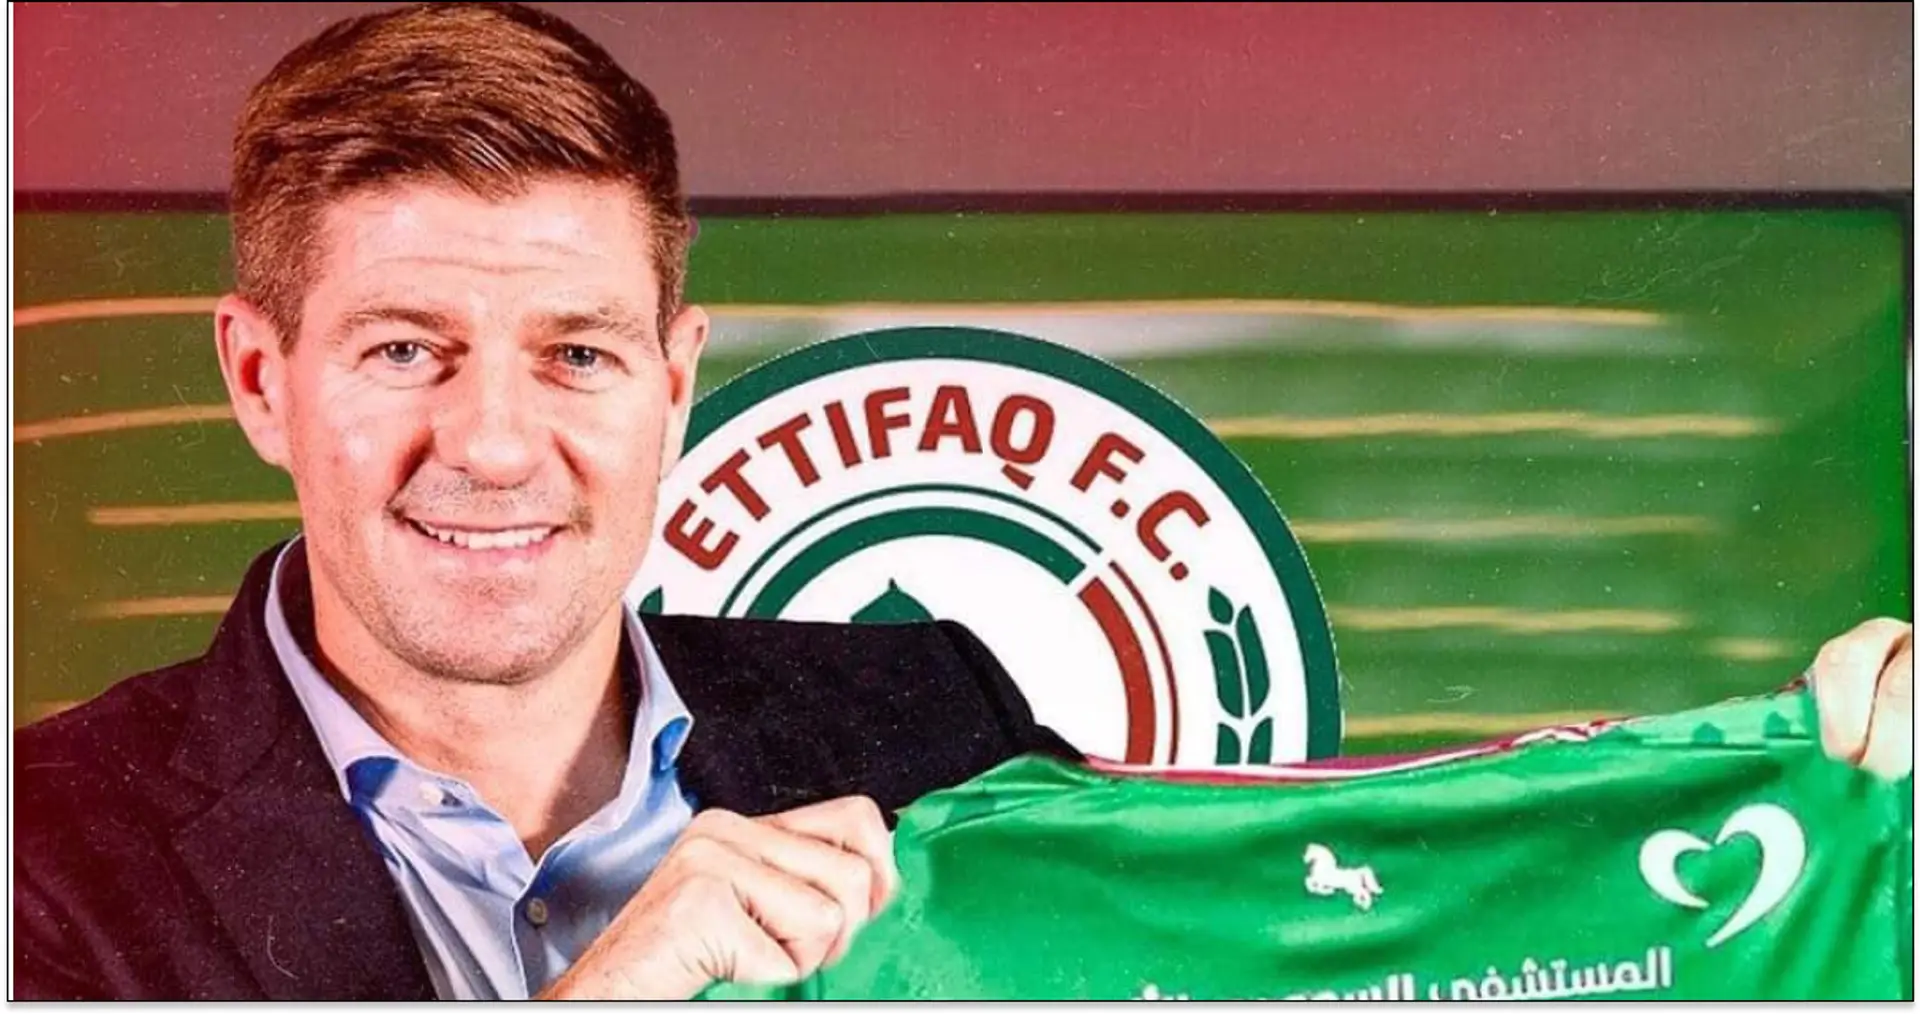 Gerrard 'to pen new deal' with Al Ettifaq amid potential sack rumours